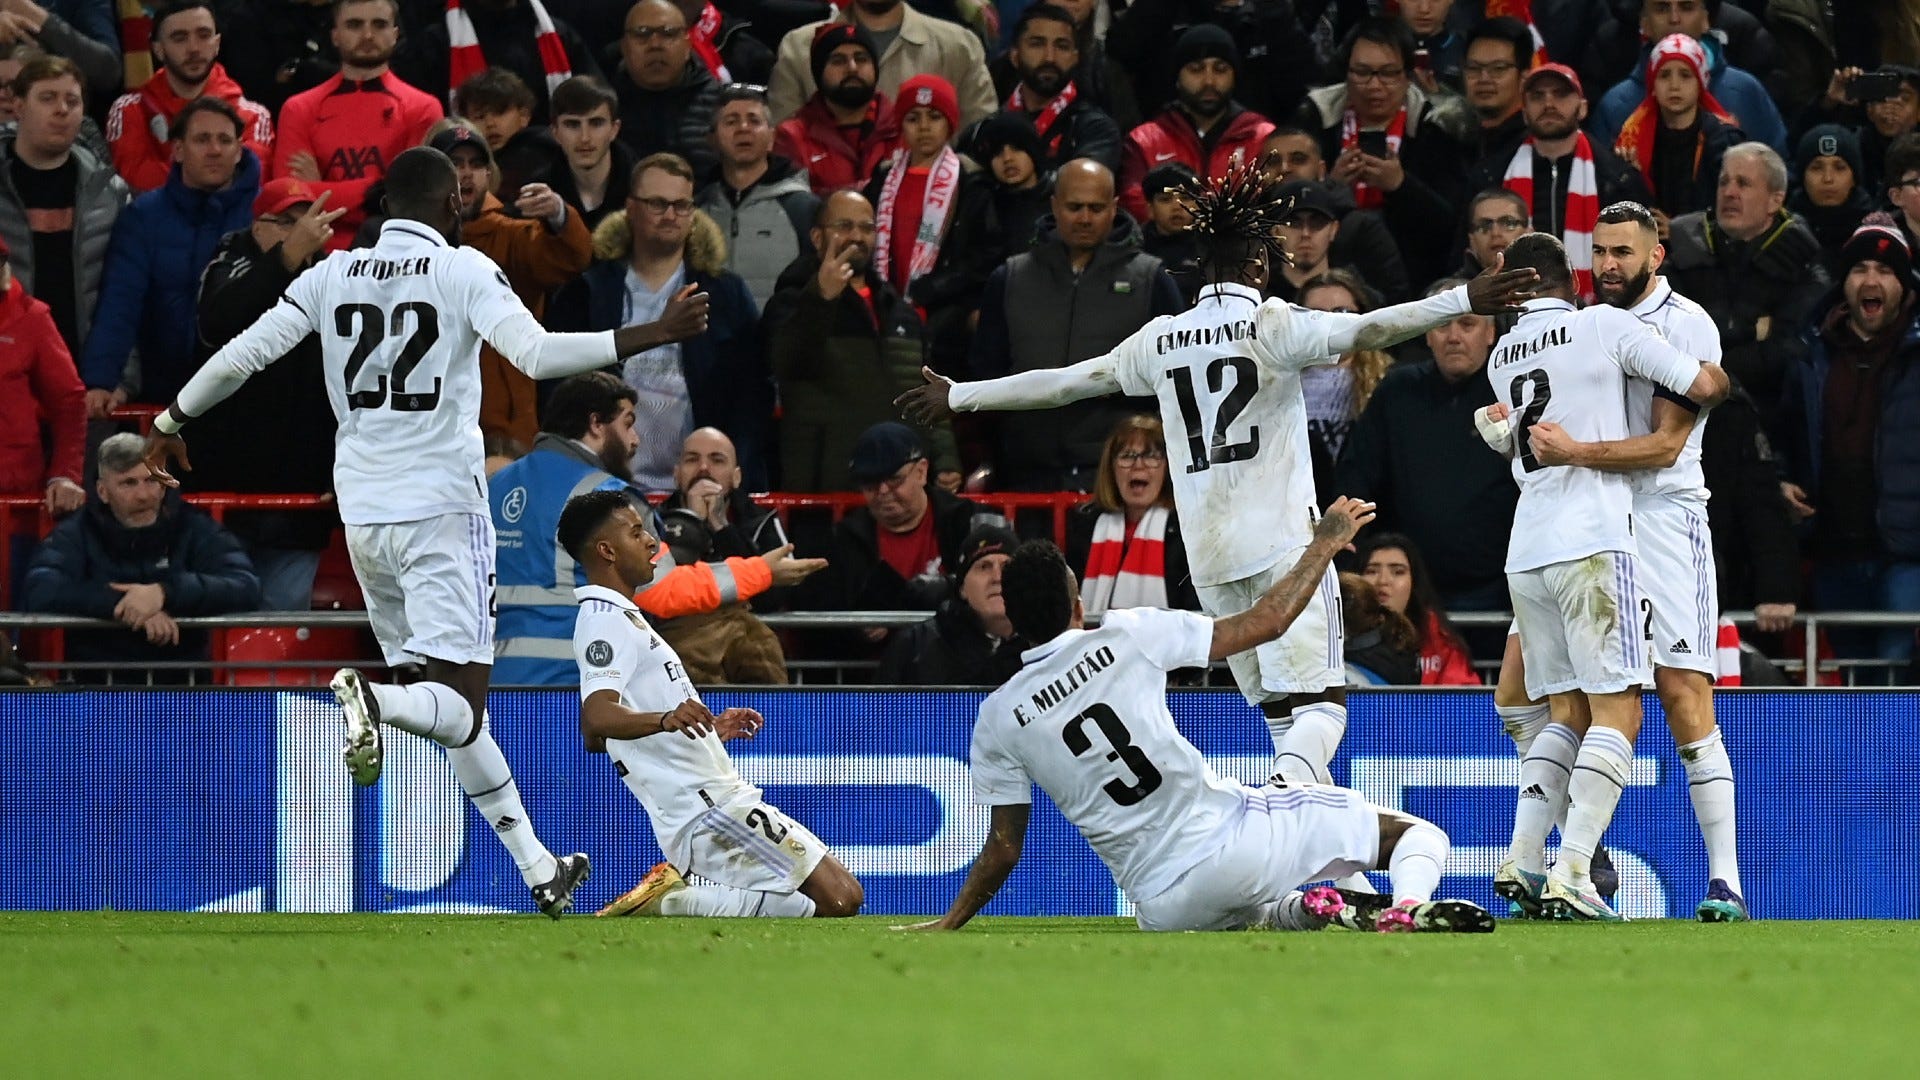 Real Madrid players celebrating a goal against Liverpool